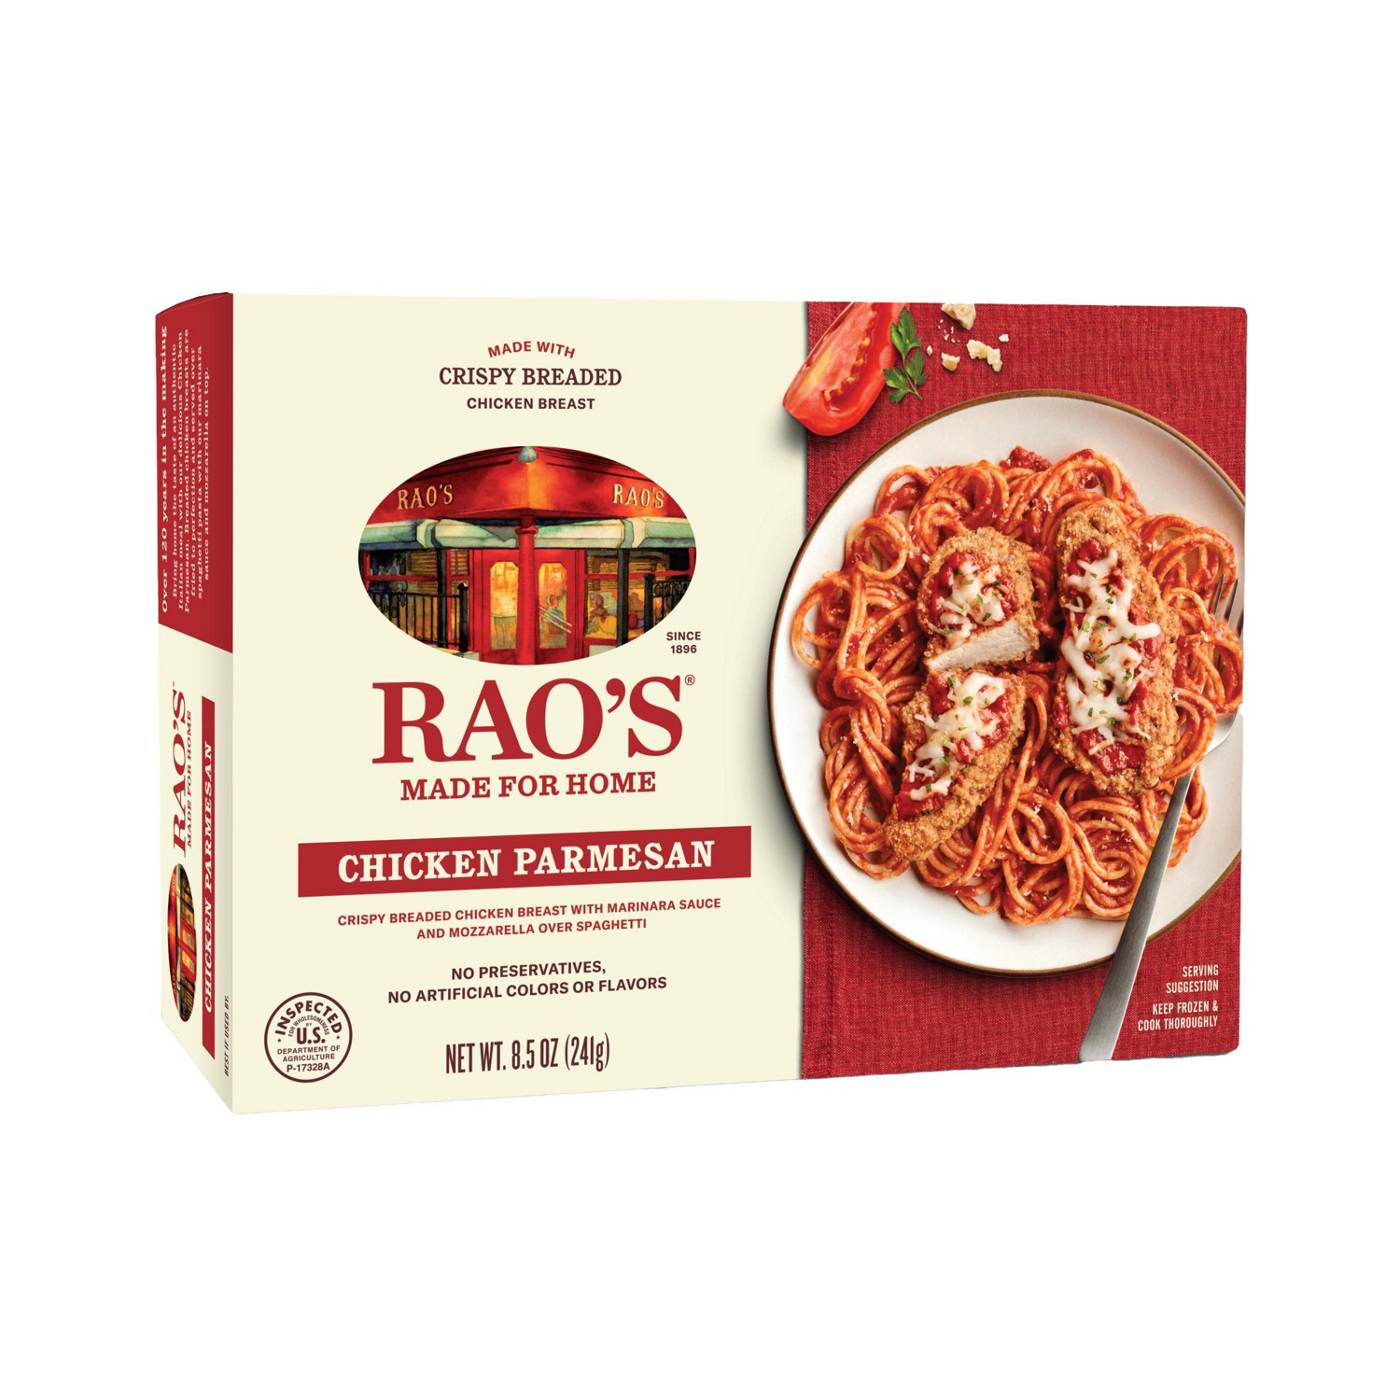 Rao's Chicken Parmesan Frozen Meal; image 1 of 2